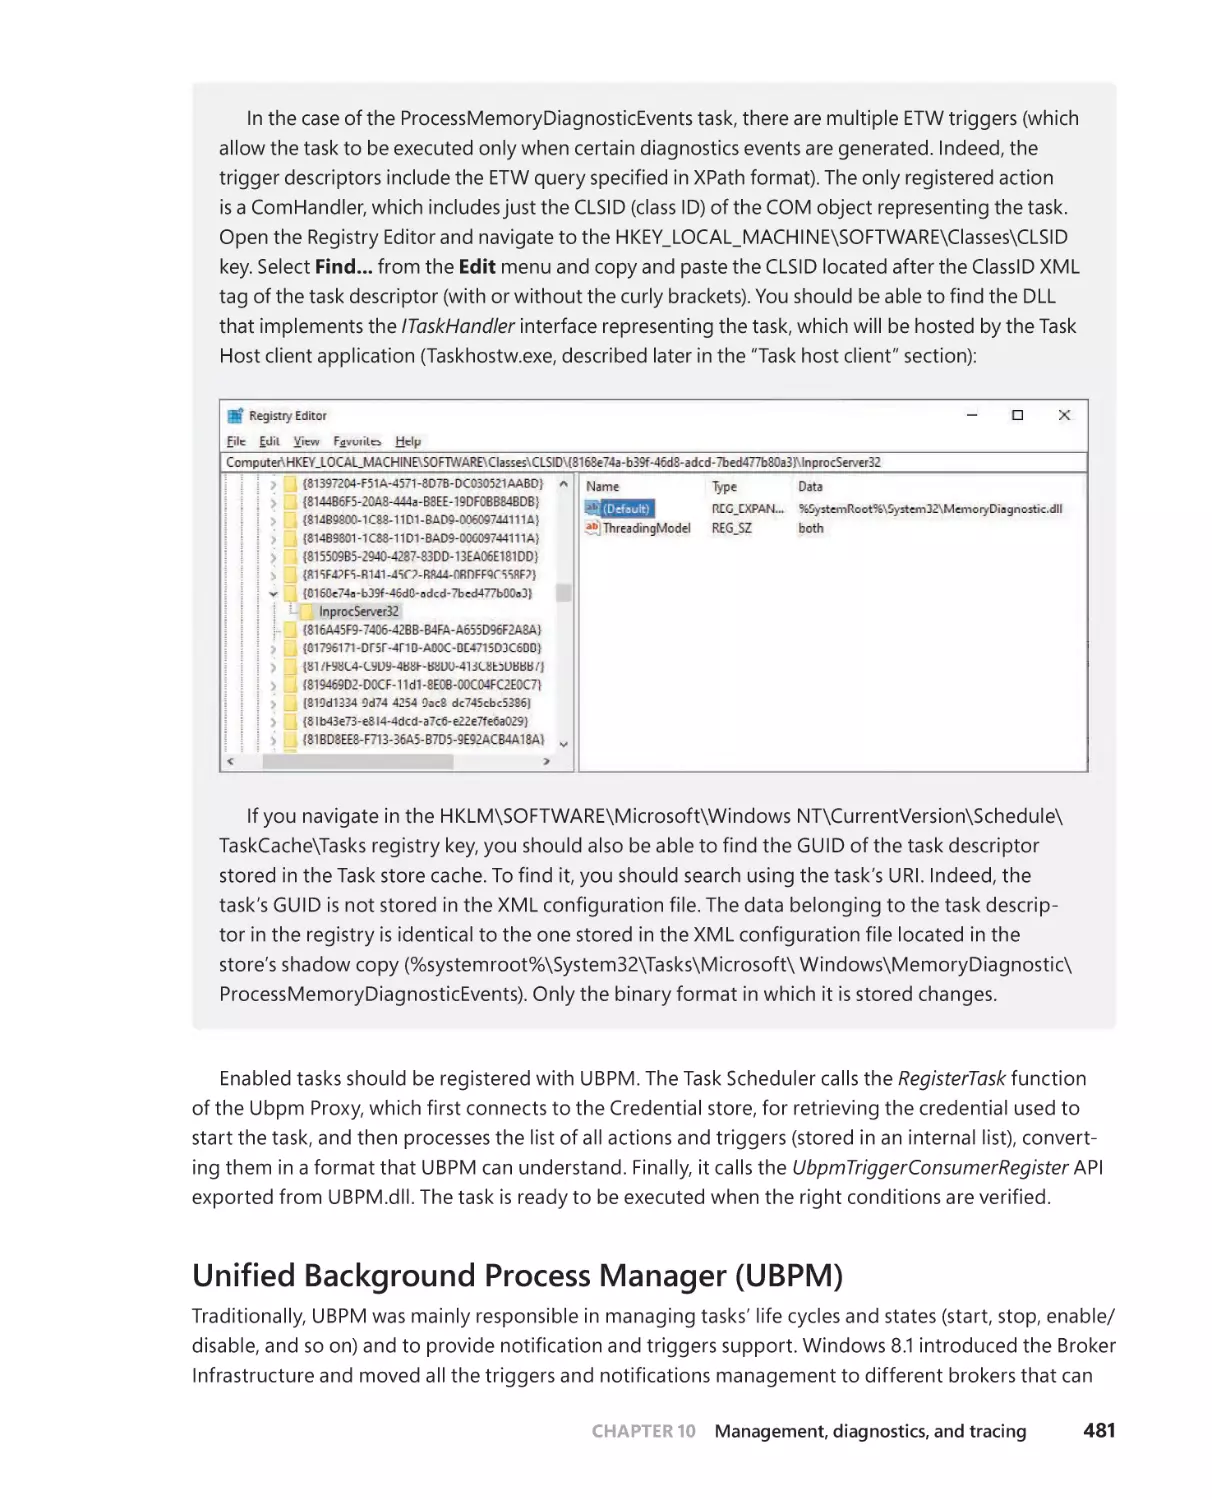 Unified Background Process Manager (UBPM)